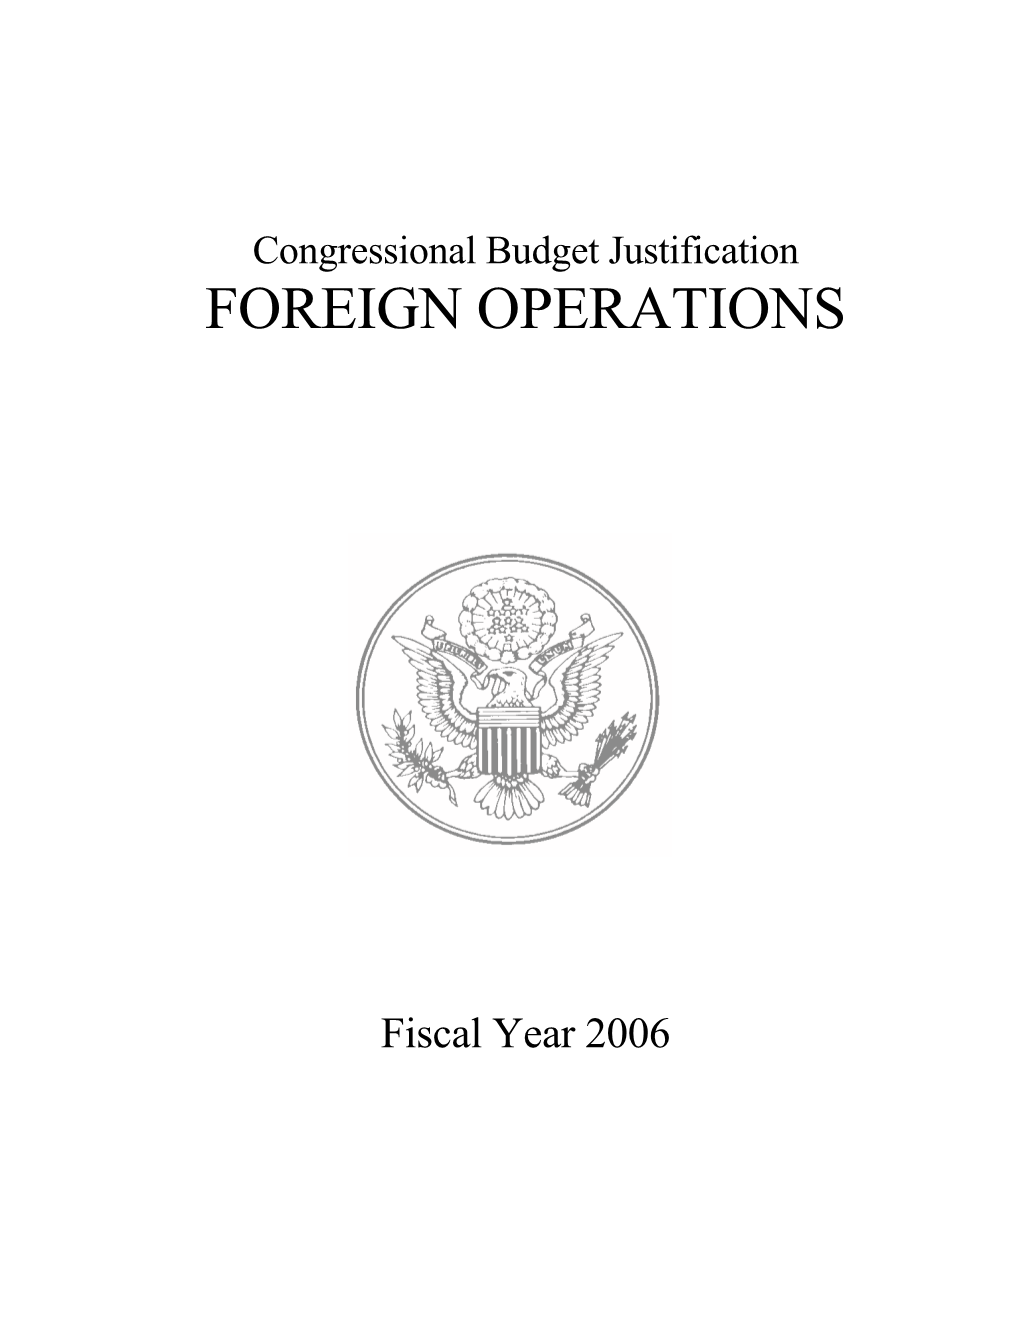 Foreign Operations